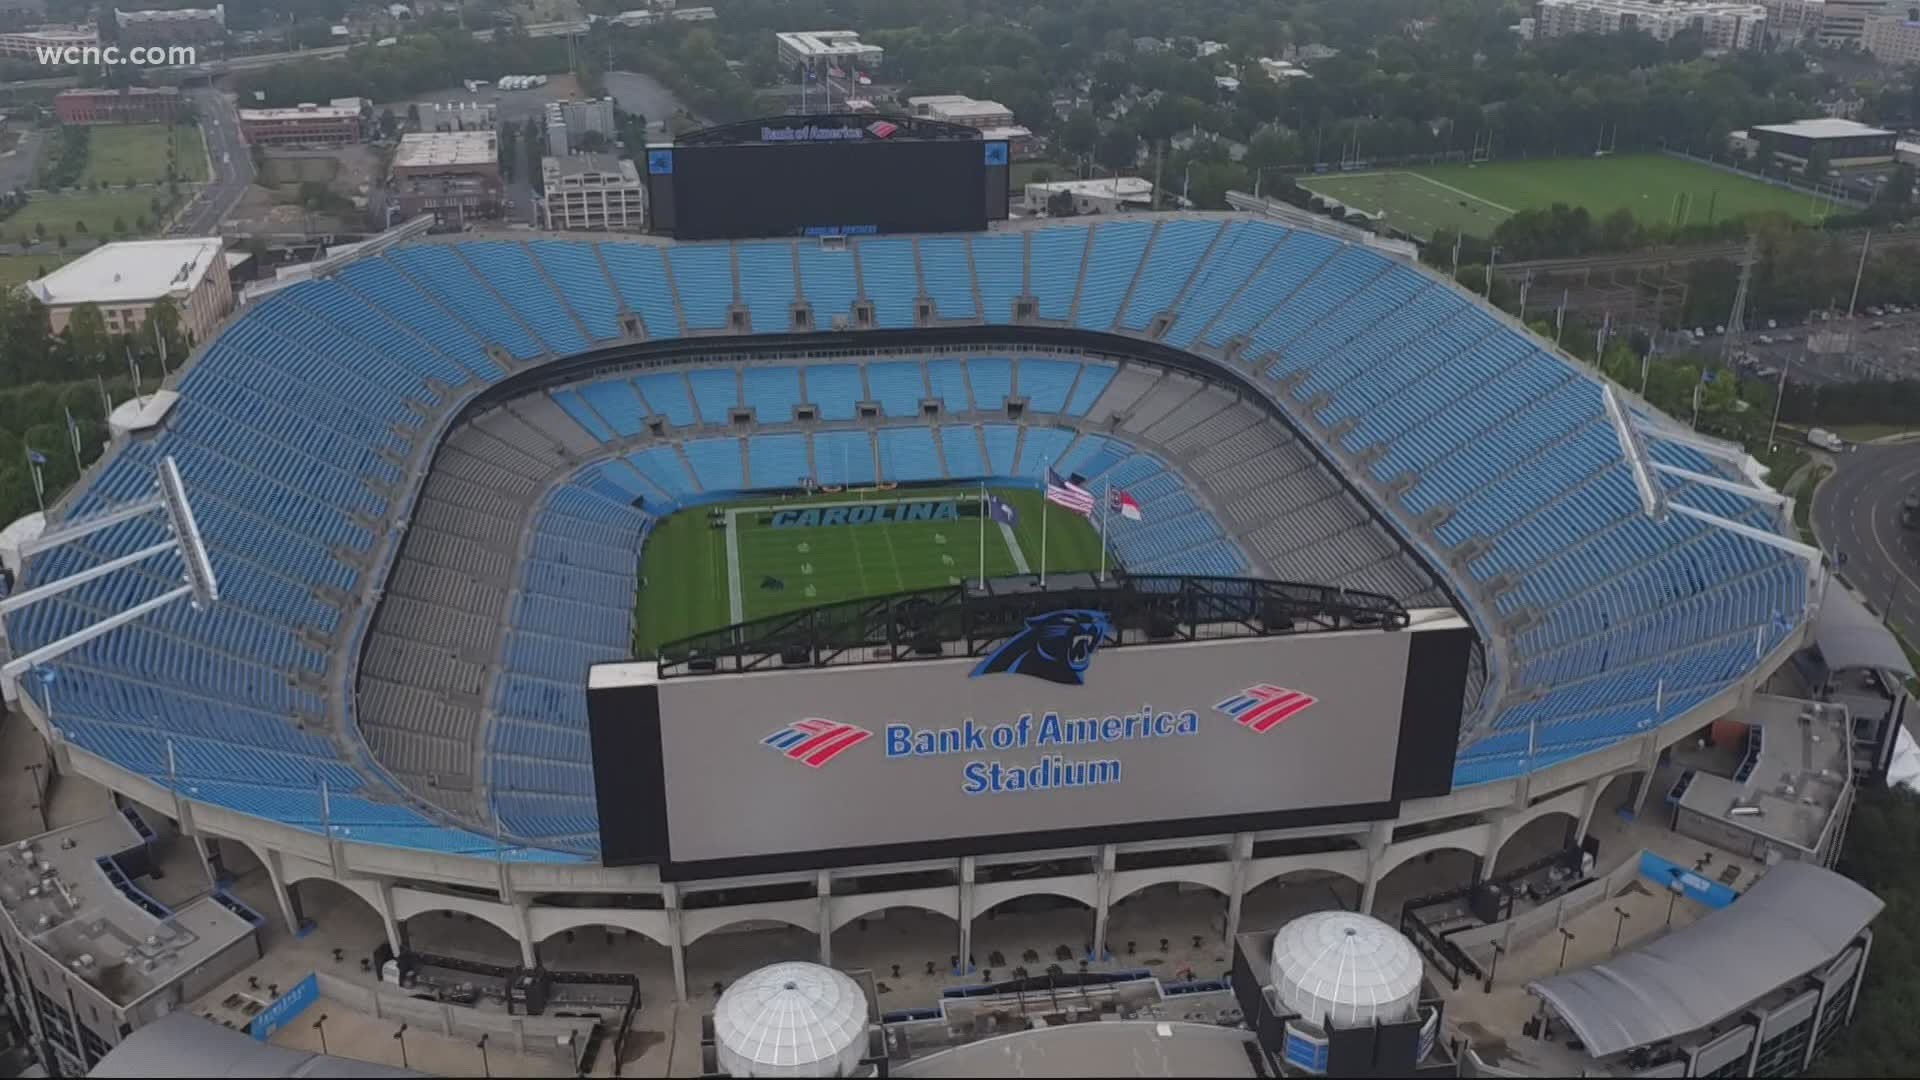 Bank of America Stadium and Charlotte Motor Speedway will serve as initial venues to contribute to this public-private initiative.